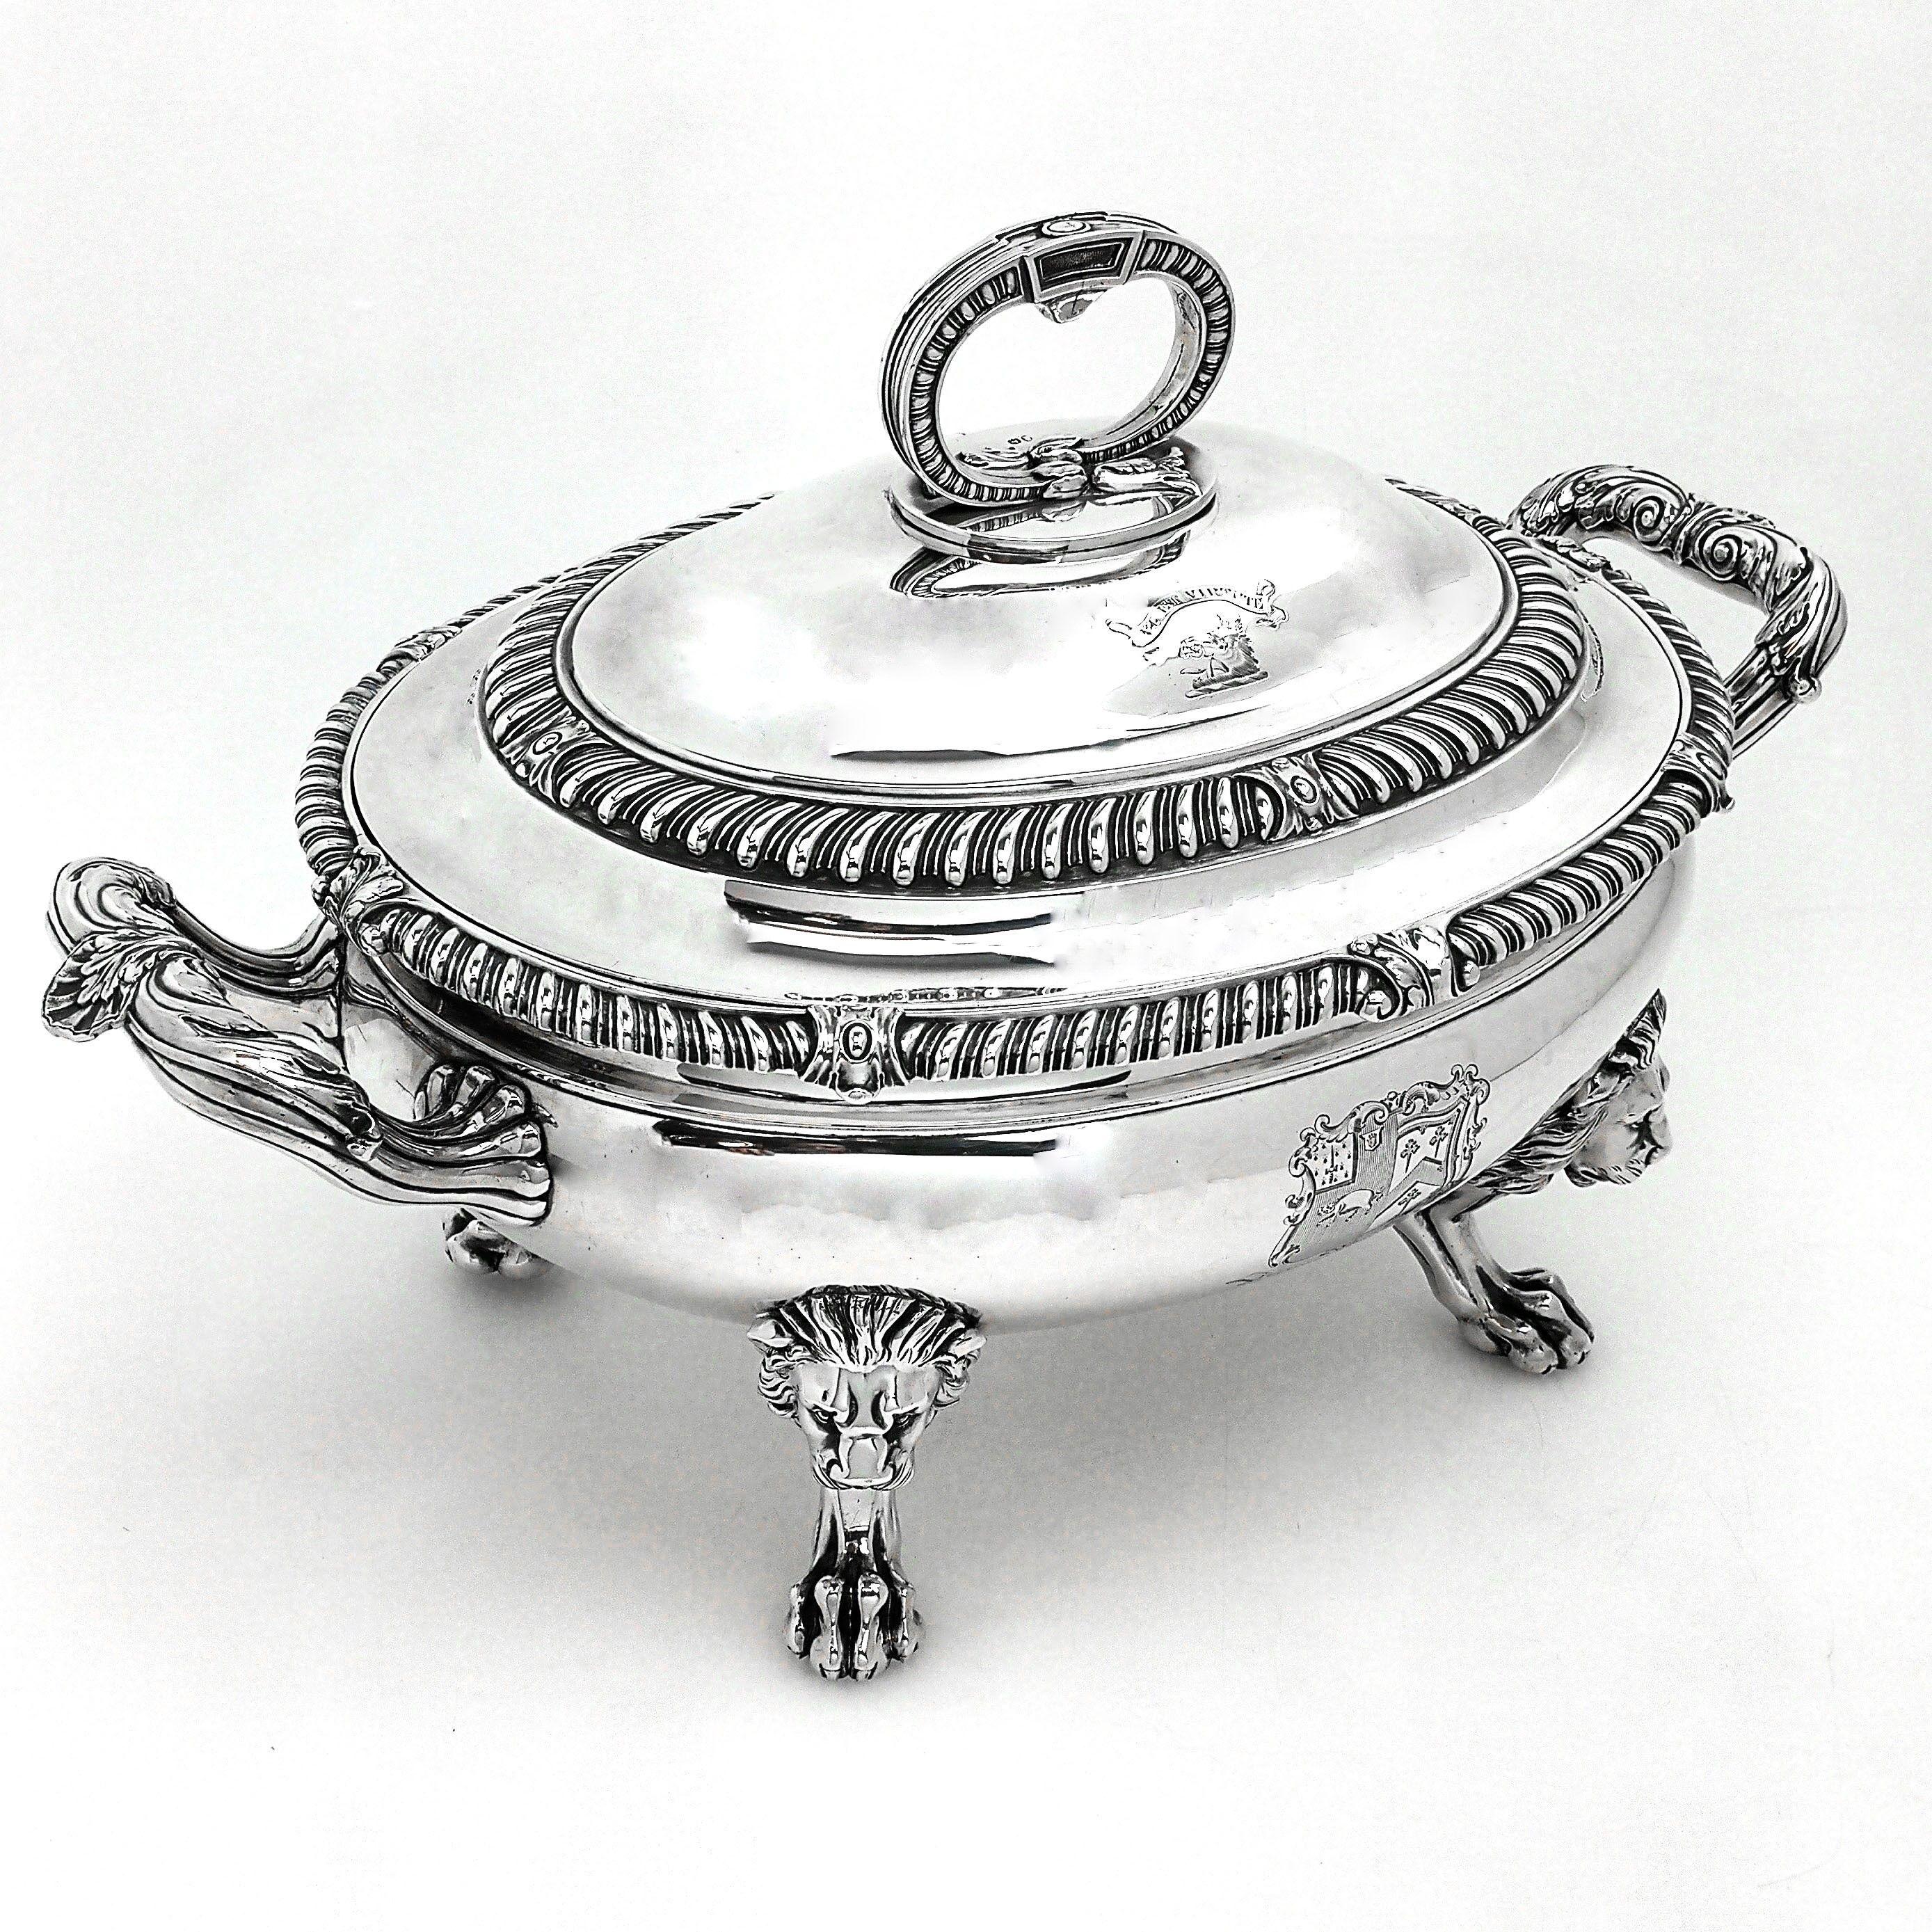 A magnificent Georgian solid Silver Soup Tureen by the esteemed Silversmith Paul Storr. This impressive oval shaped tureen stands on 4 lion head topped claw feet. The lid and body are decorated with classic gadroon pattern borders. Both lid and body